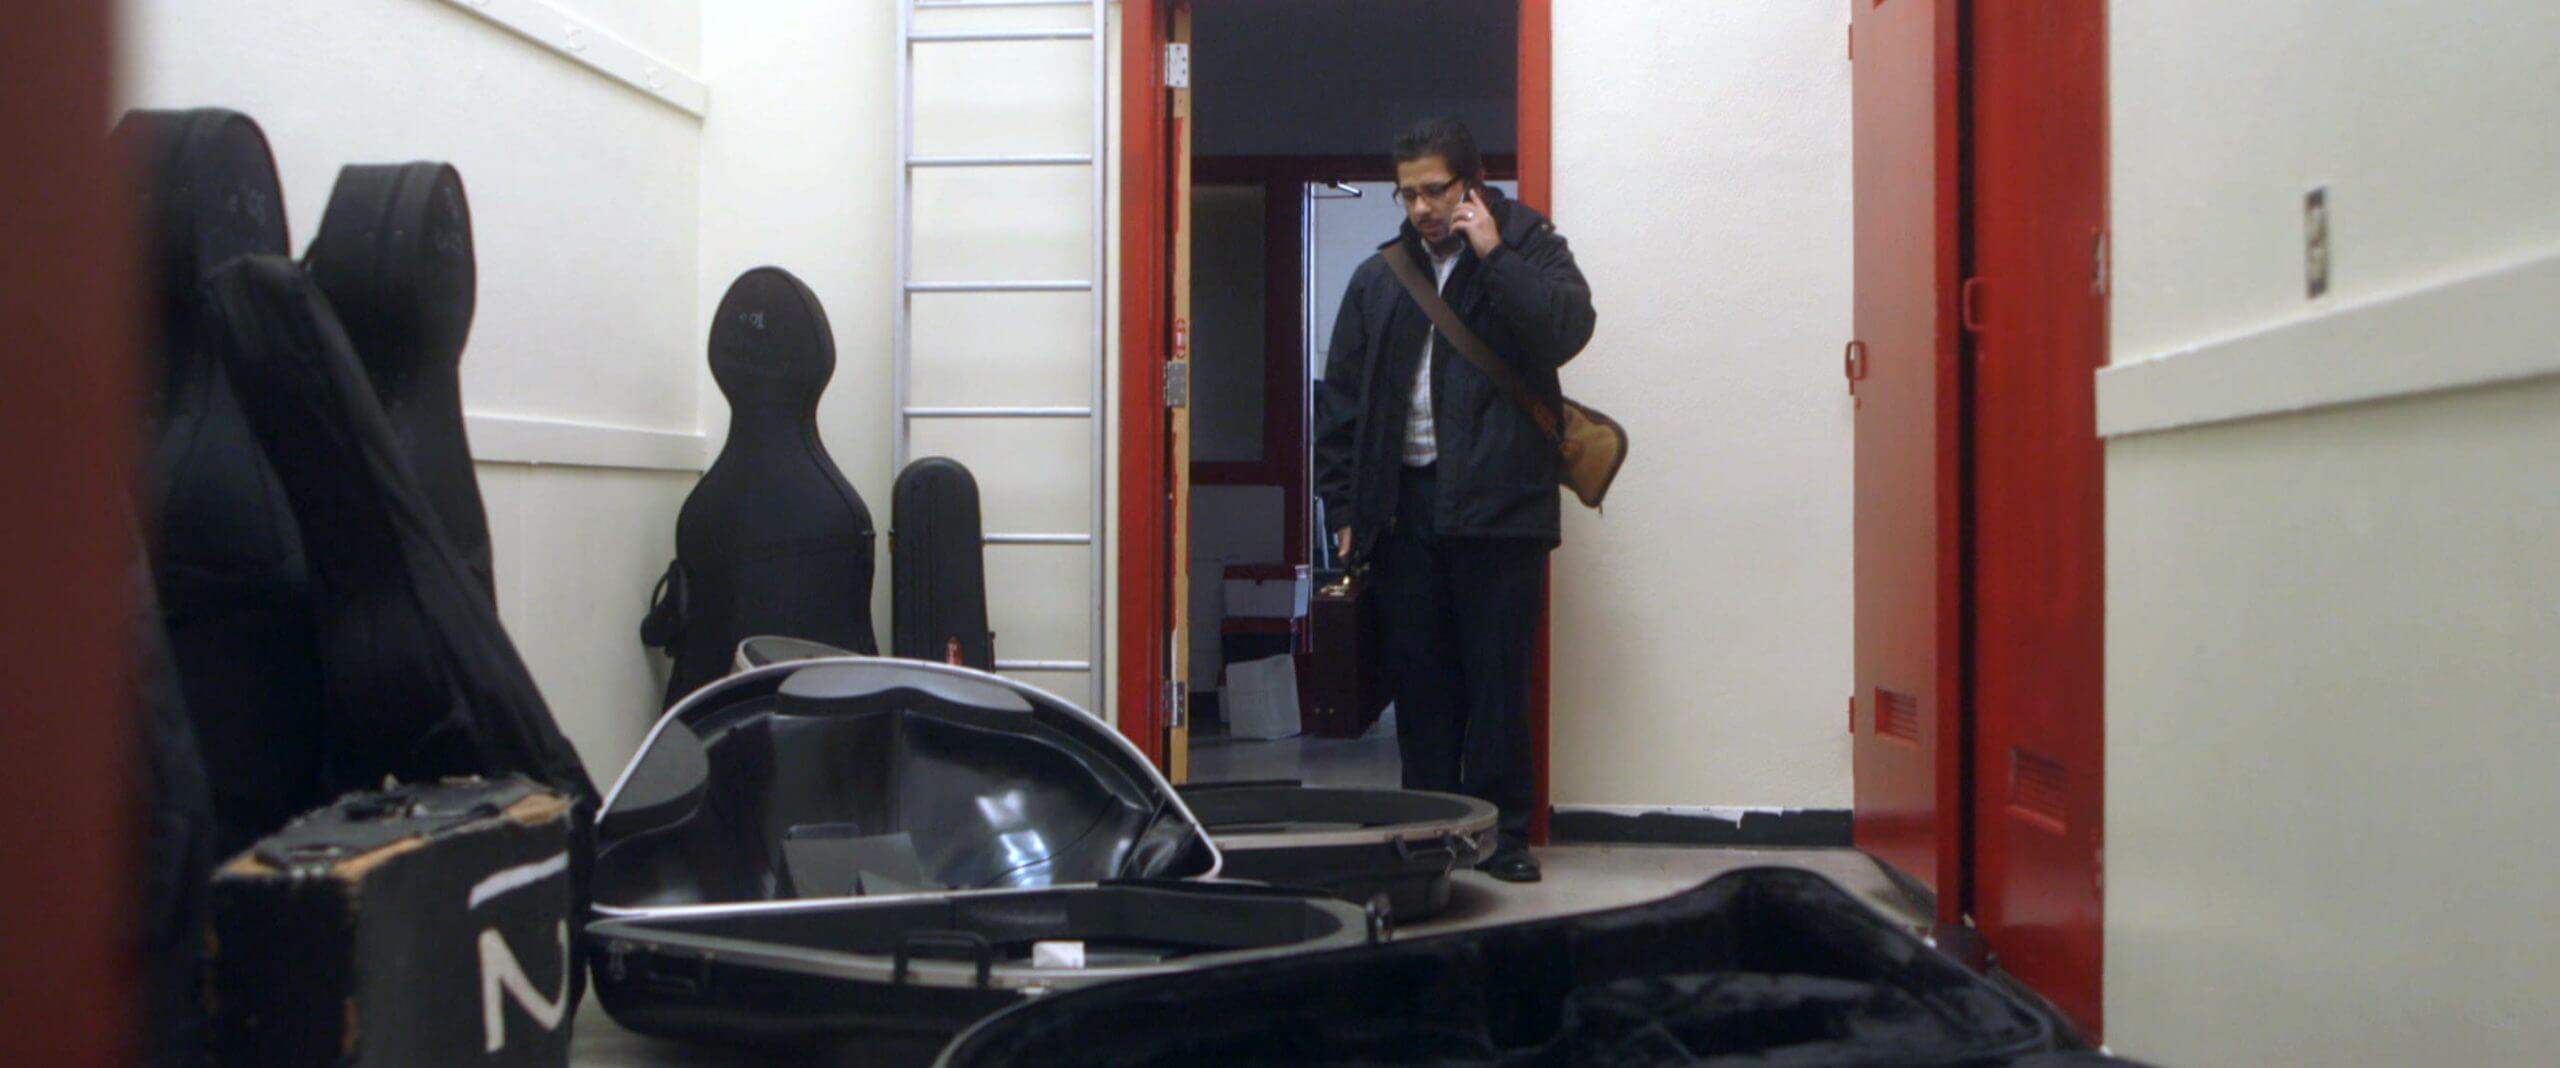 Still from The Tuba Thieves. A person in a jacket on a phone call standing in the doorway of a room. The room is filled with empty instrument cases. Color photograph.